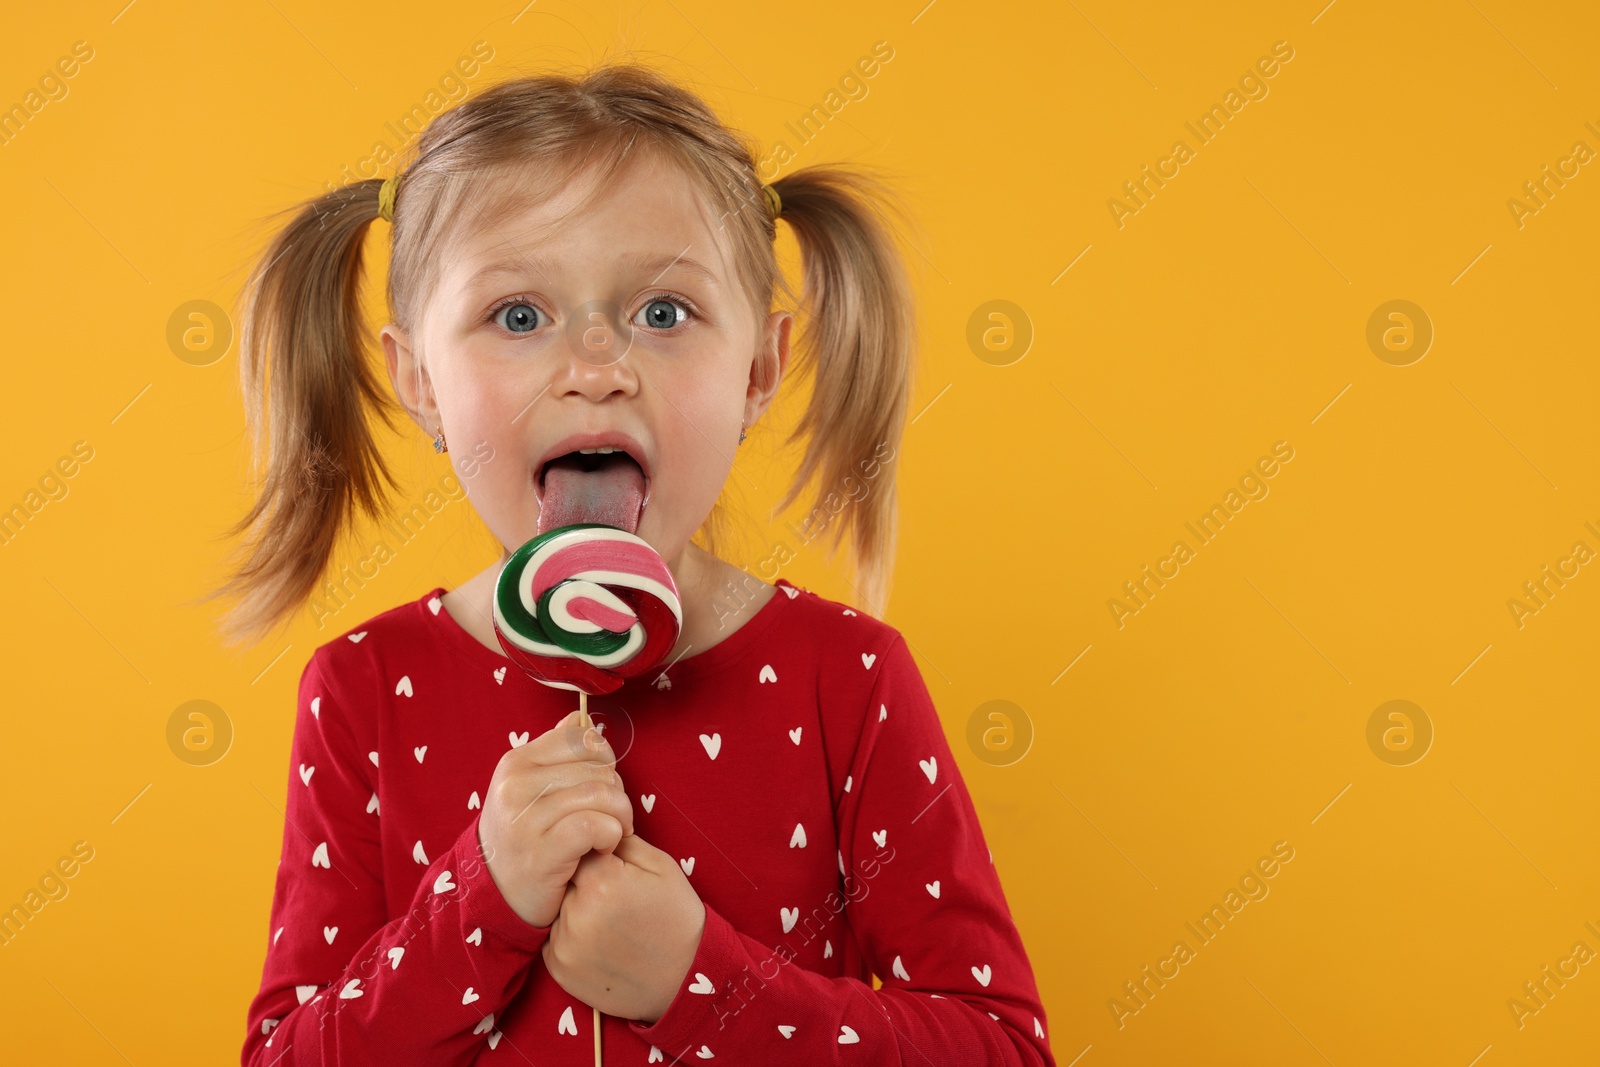 Photo of Portrait of cute girl licking lollipop on orange background, space for text